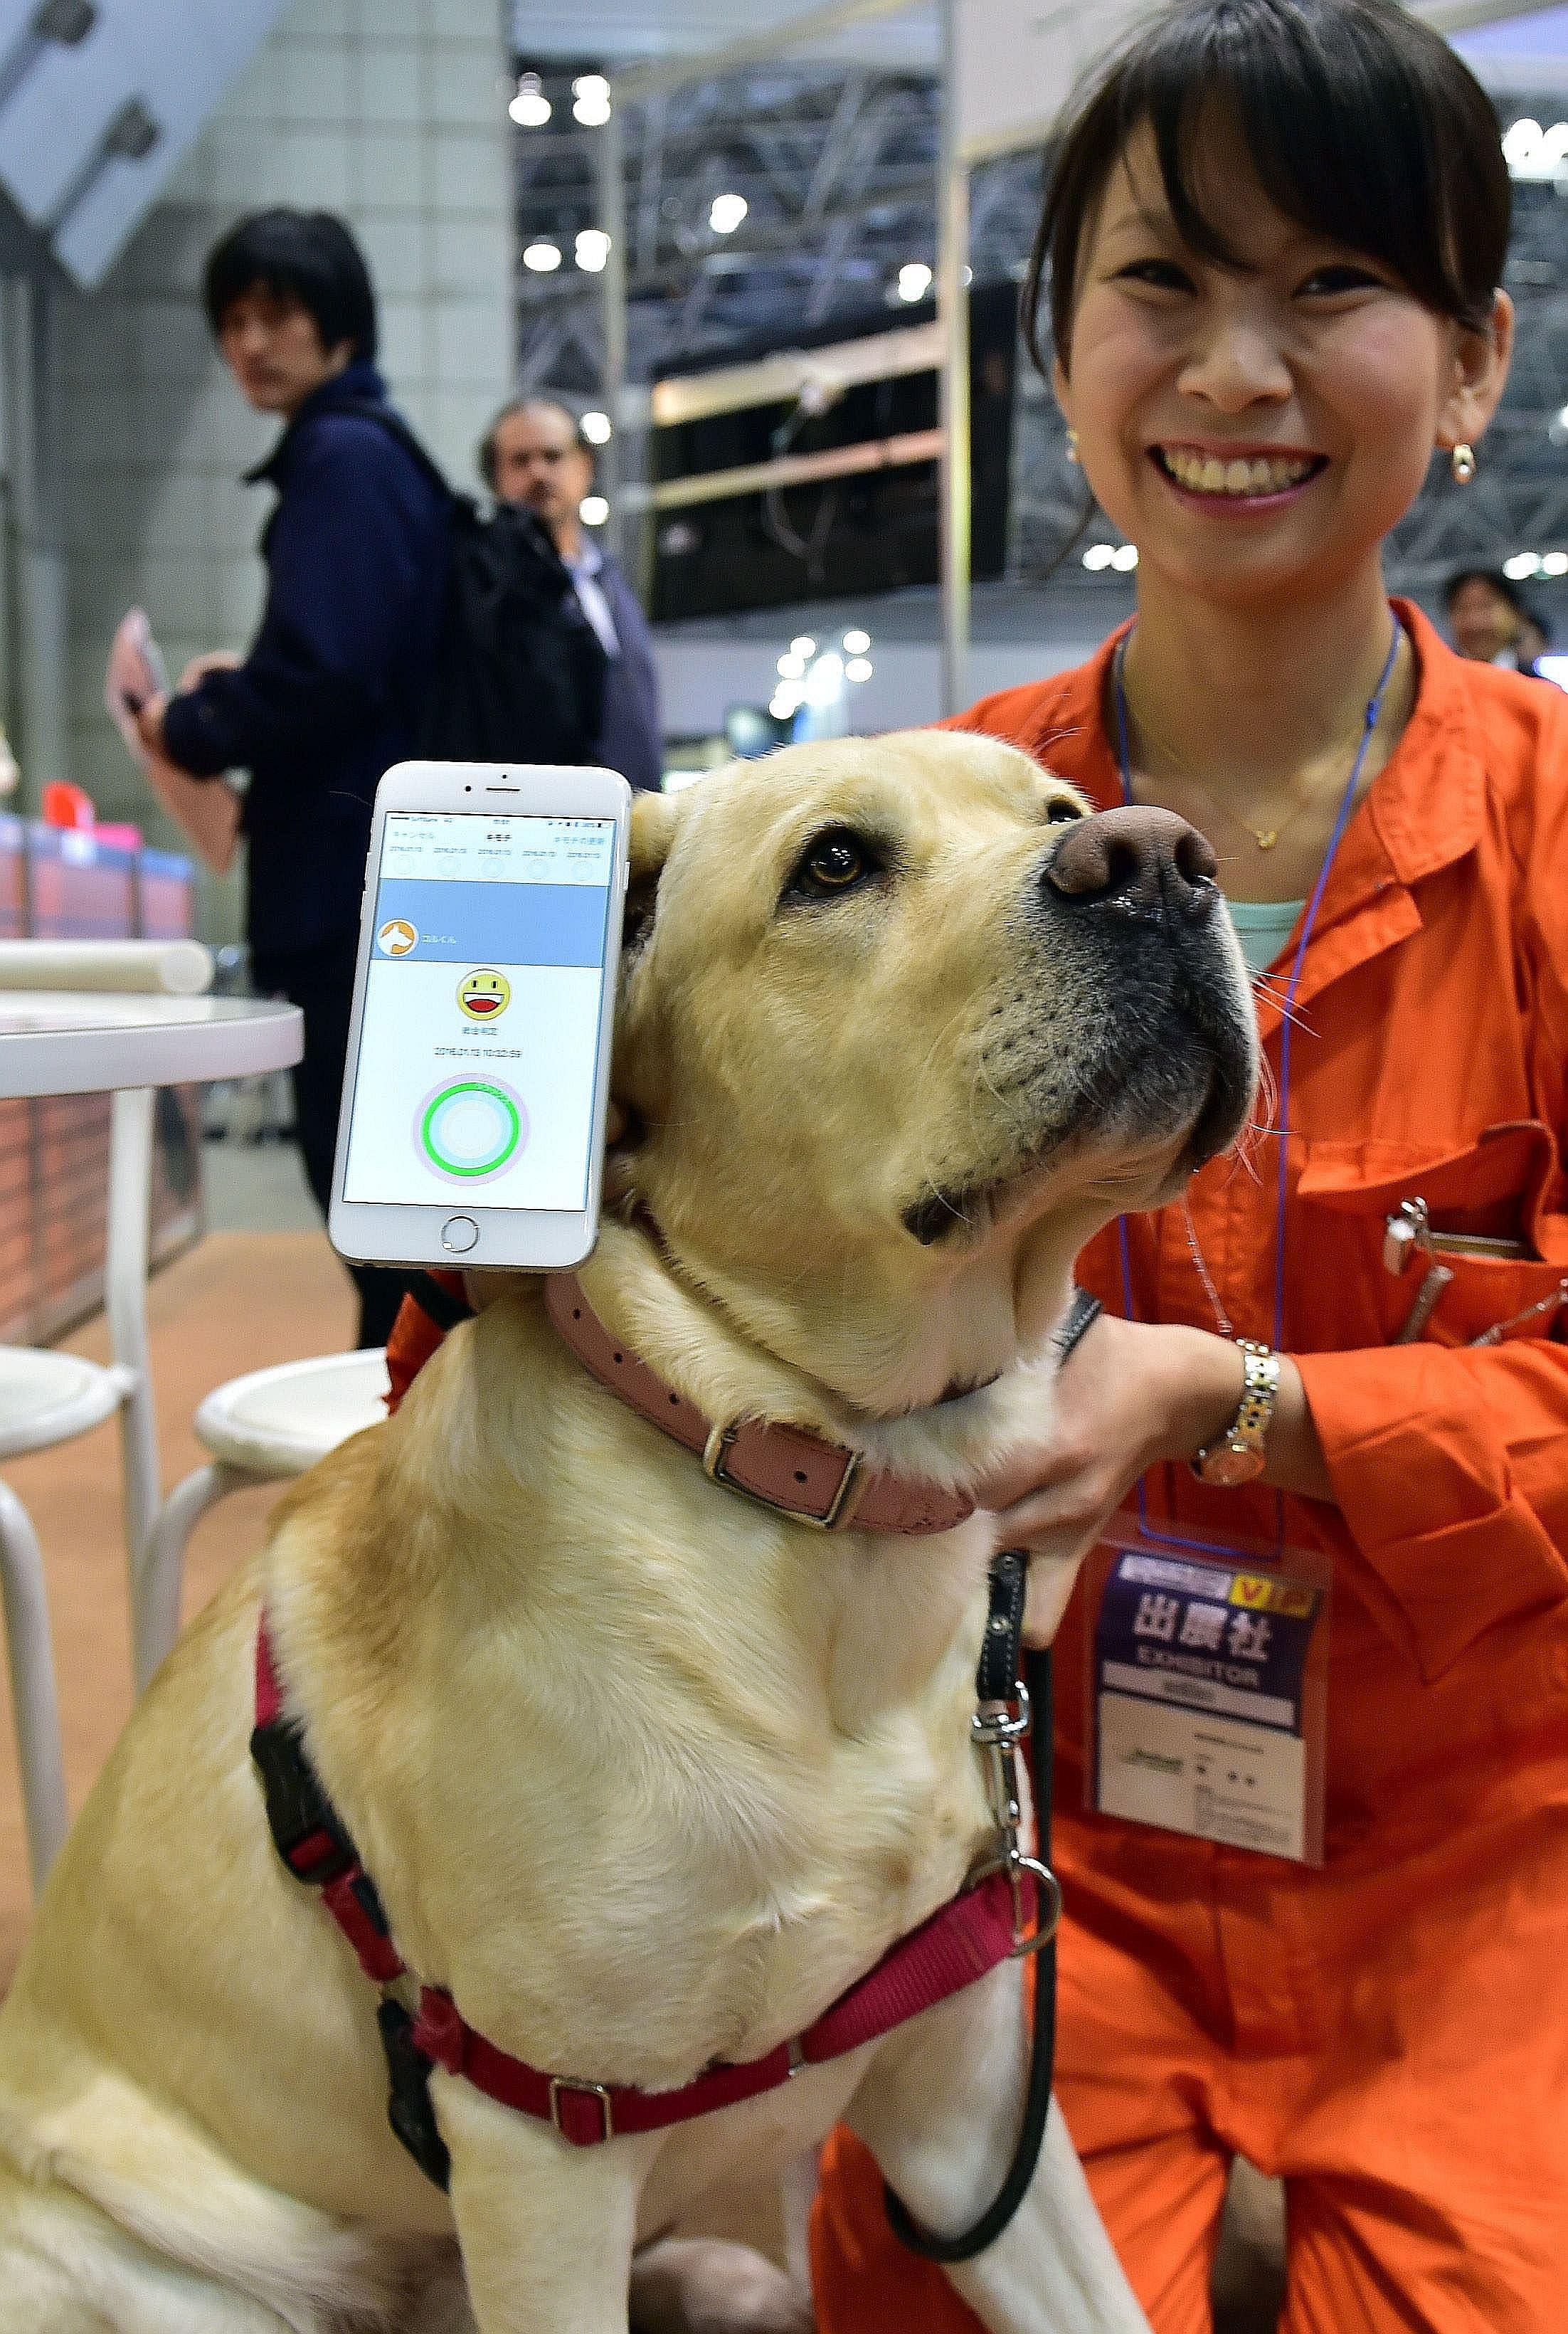 A dog with a communication device called the "Internet of Animals", developed by Japanese electronics firm Anicall, at the Wearable Device Technology Expo in Tokyo on Wednesday. The device is equipped with sensors to detect motion, temperature and ai